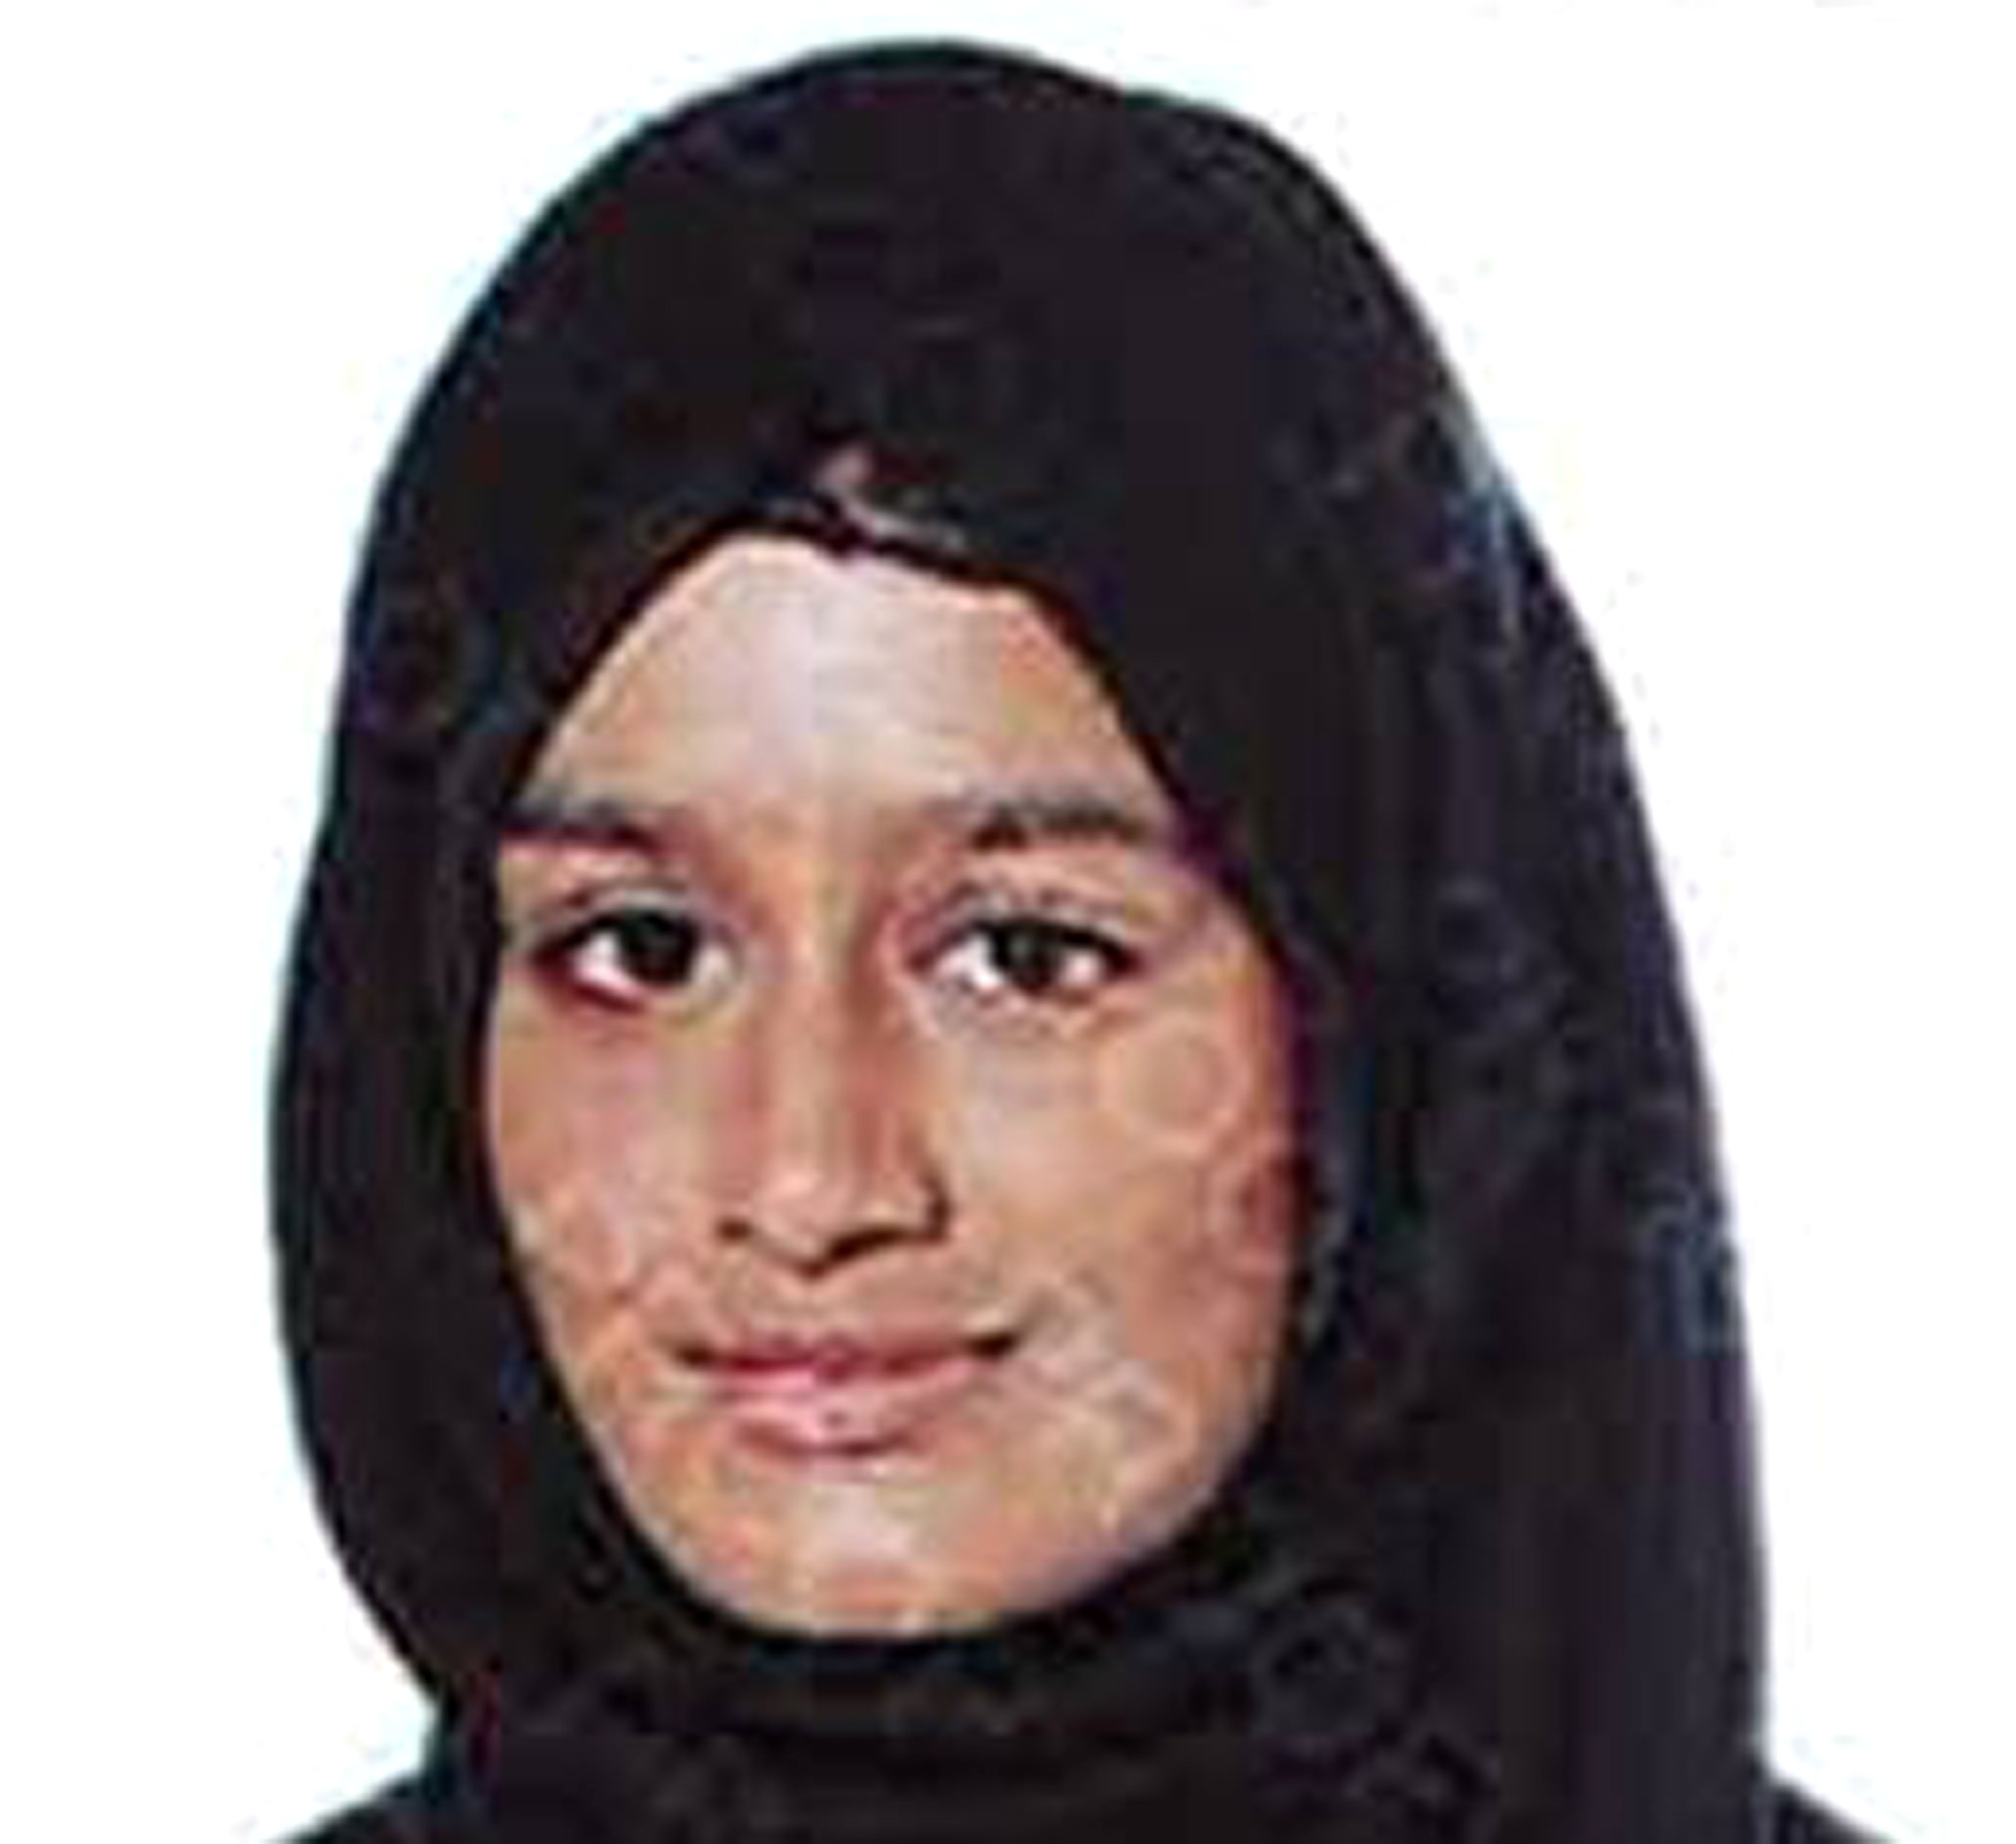 Begum’s citizenship was revoked on national security grounds shortly after she was found in a Syrian refugee camp in February 2019